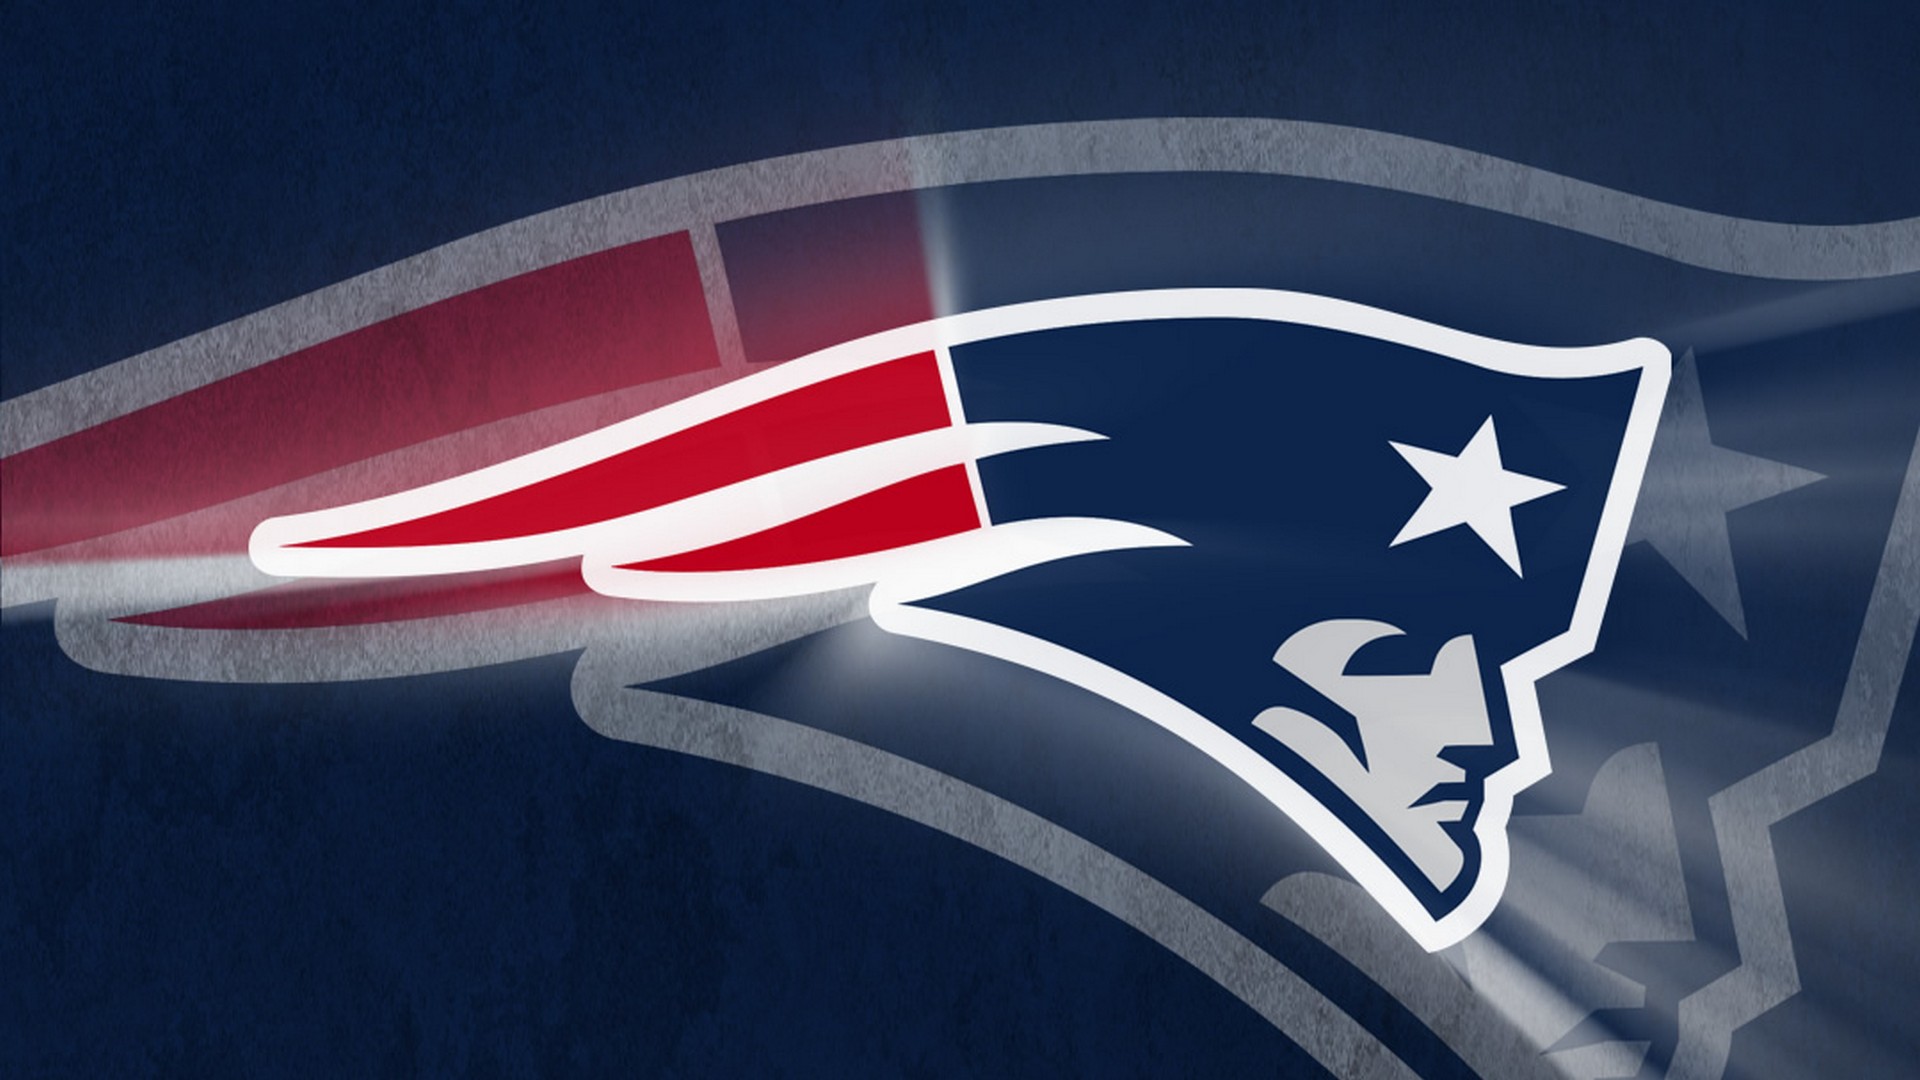 New England Patriots HD Wallpapers With Resolution 1920X1080 pixel. You can make this wallpaper for your Mac or Windows Desktop Background, iPhone, Android or Tablet and another Smartphone device for free